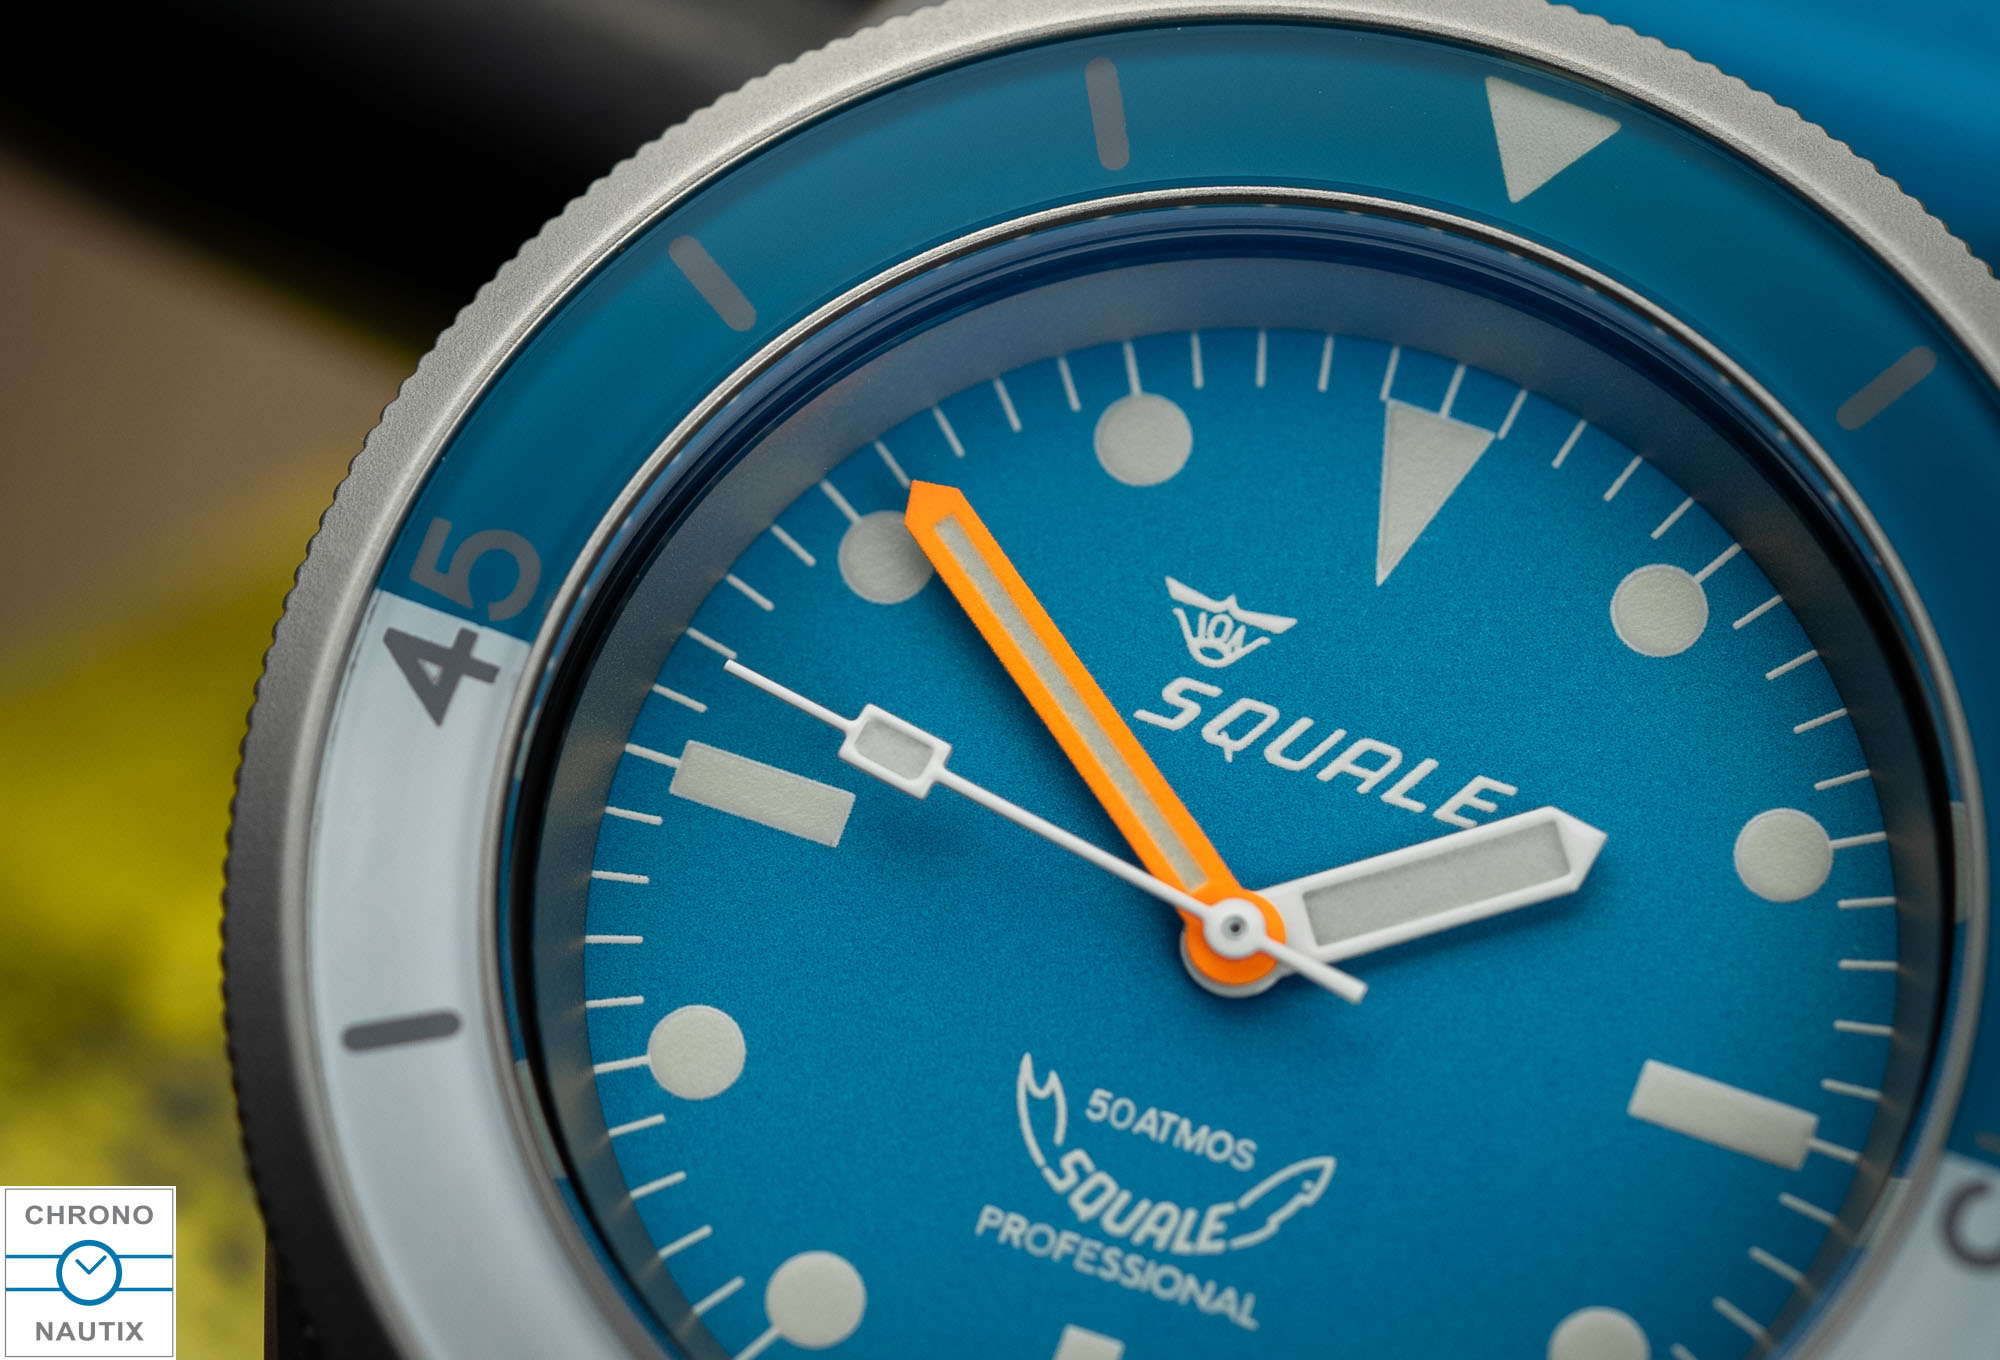 Squale x Chronofactum 1521 Squalo Bianco Special Edition Blasted Case Test 29